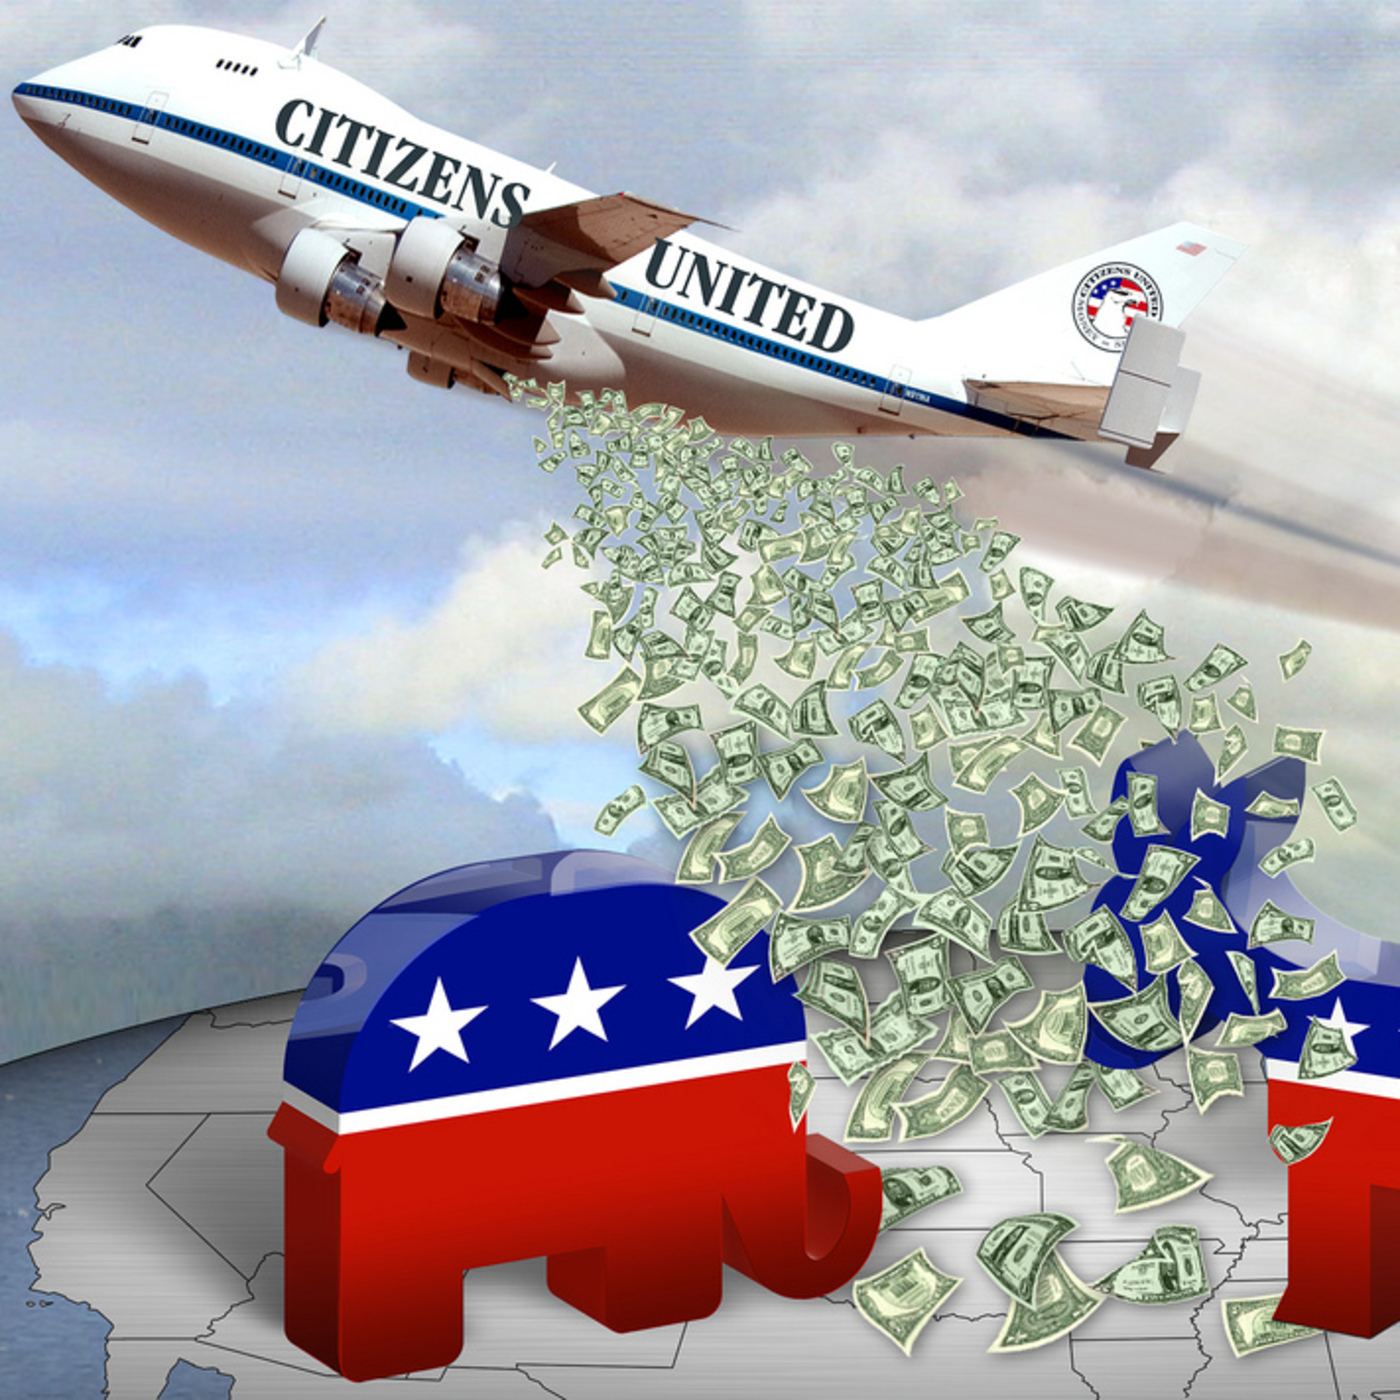 What's so Bad about Citizens United?